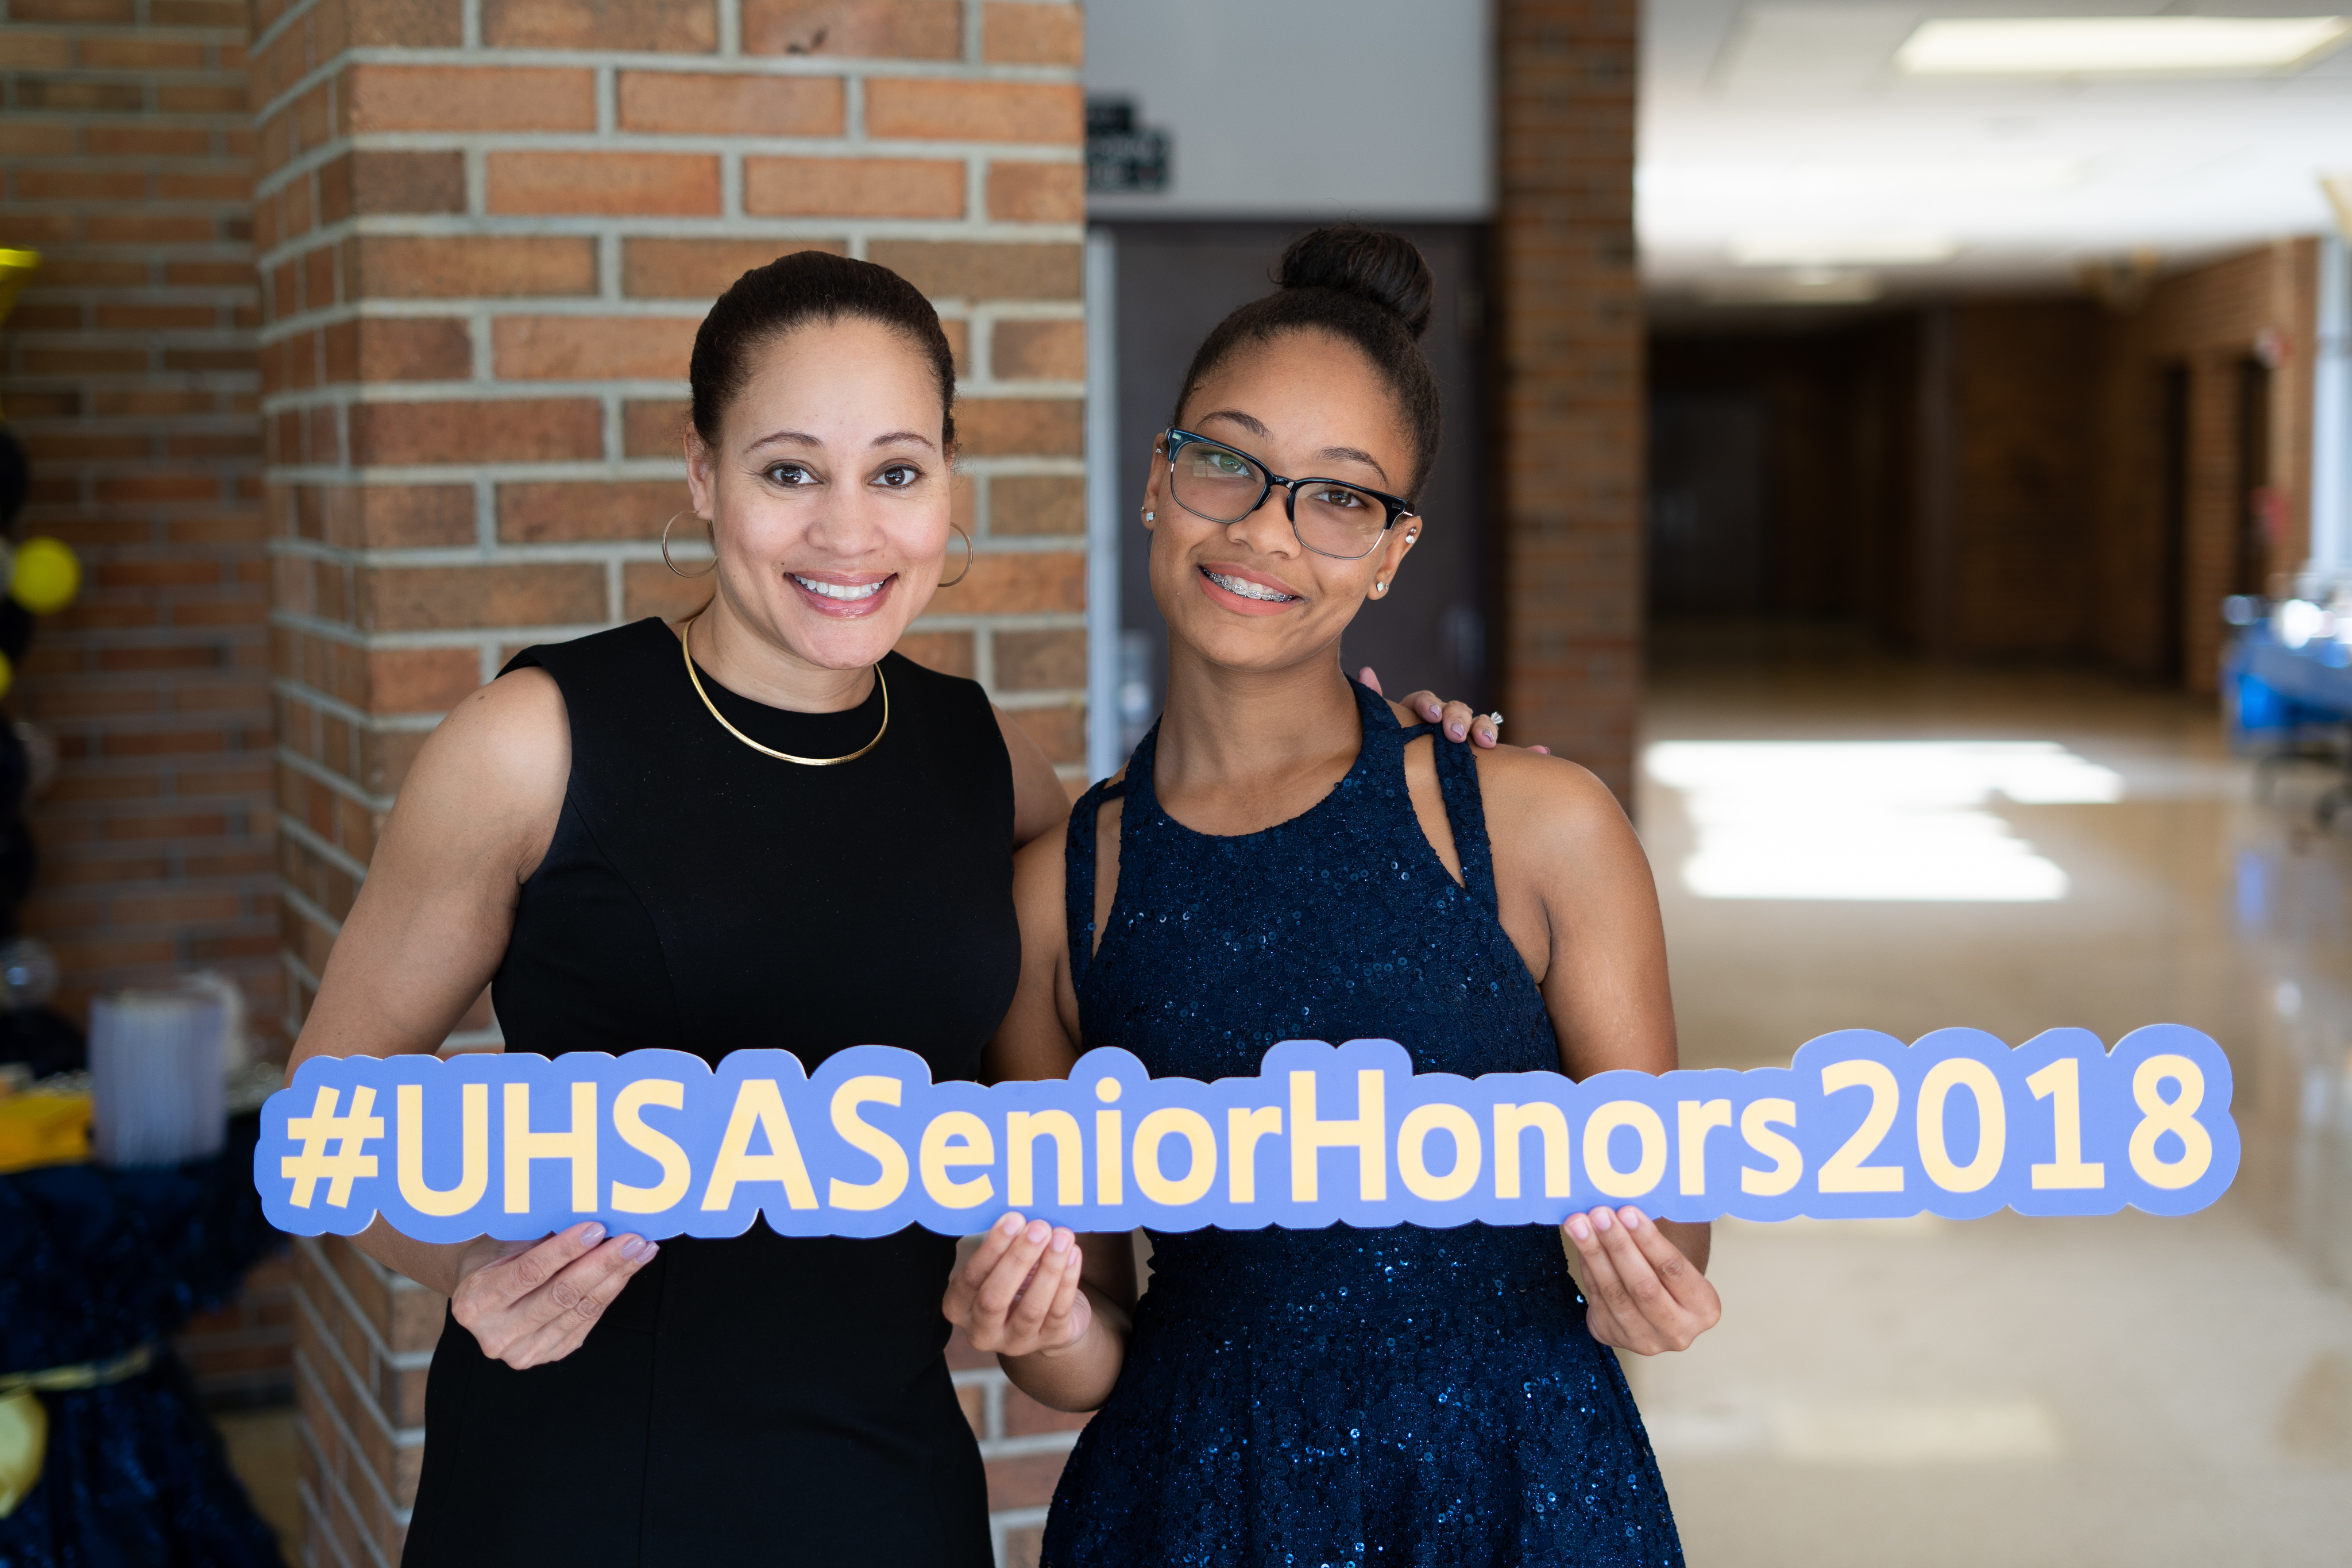 Two girls showing #UHSASeniorHonors2018